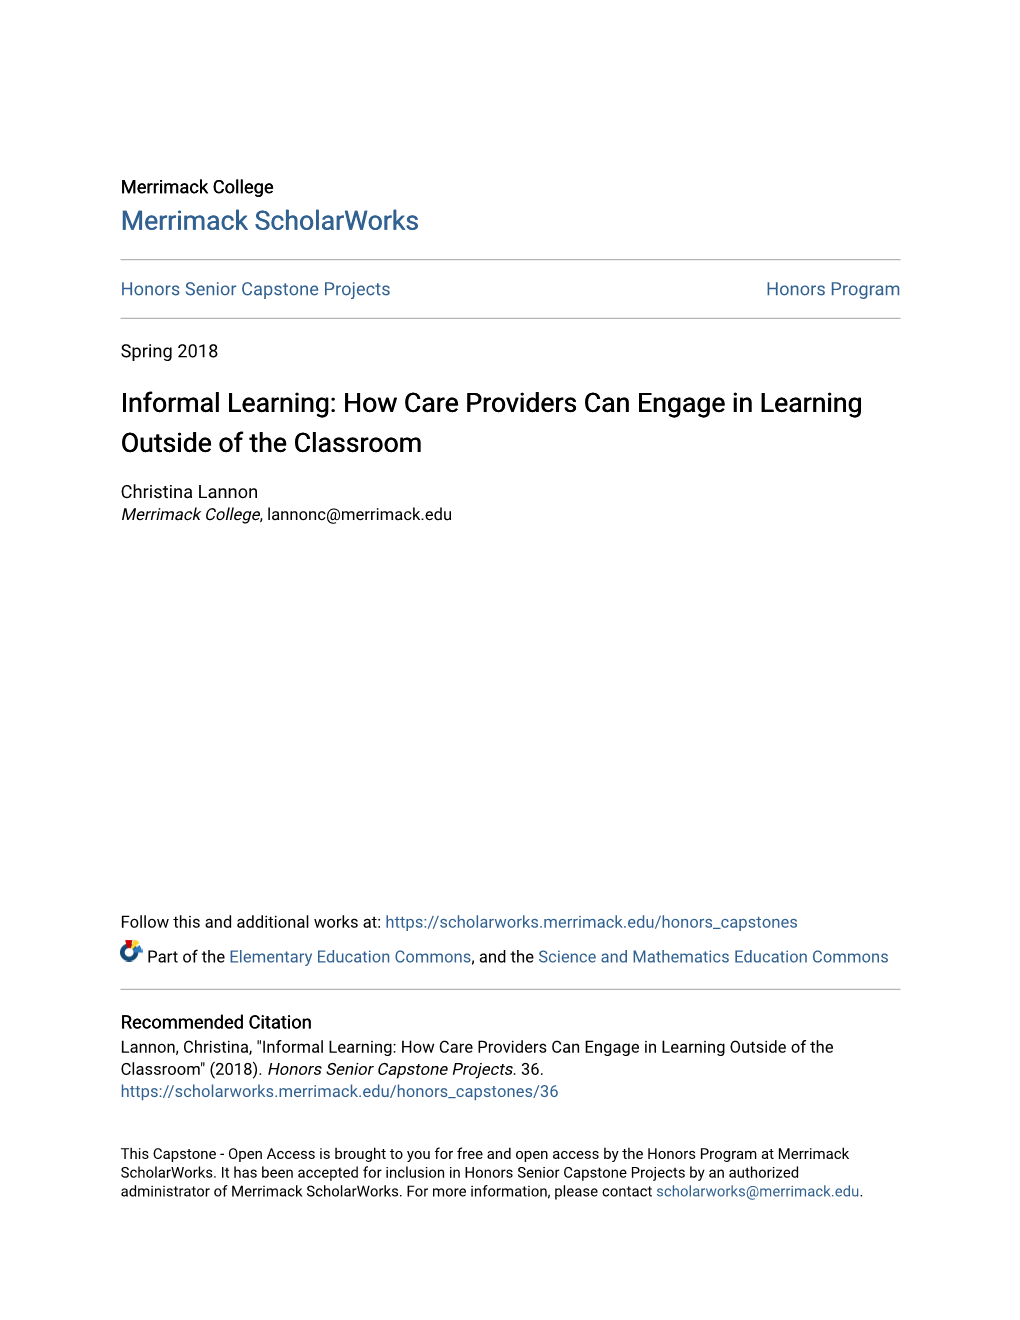 Informal Learning: How Care Providers Can Engage in Learning Outside of the Classroom